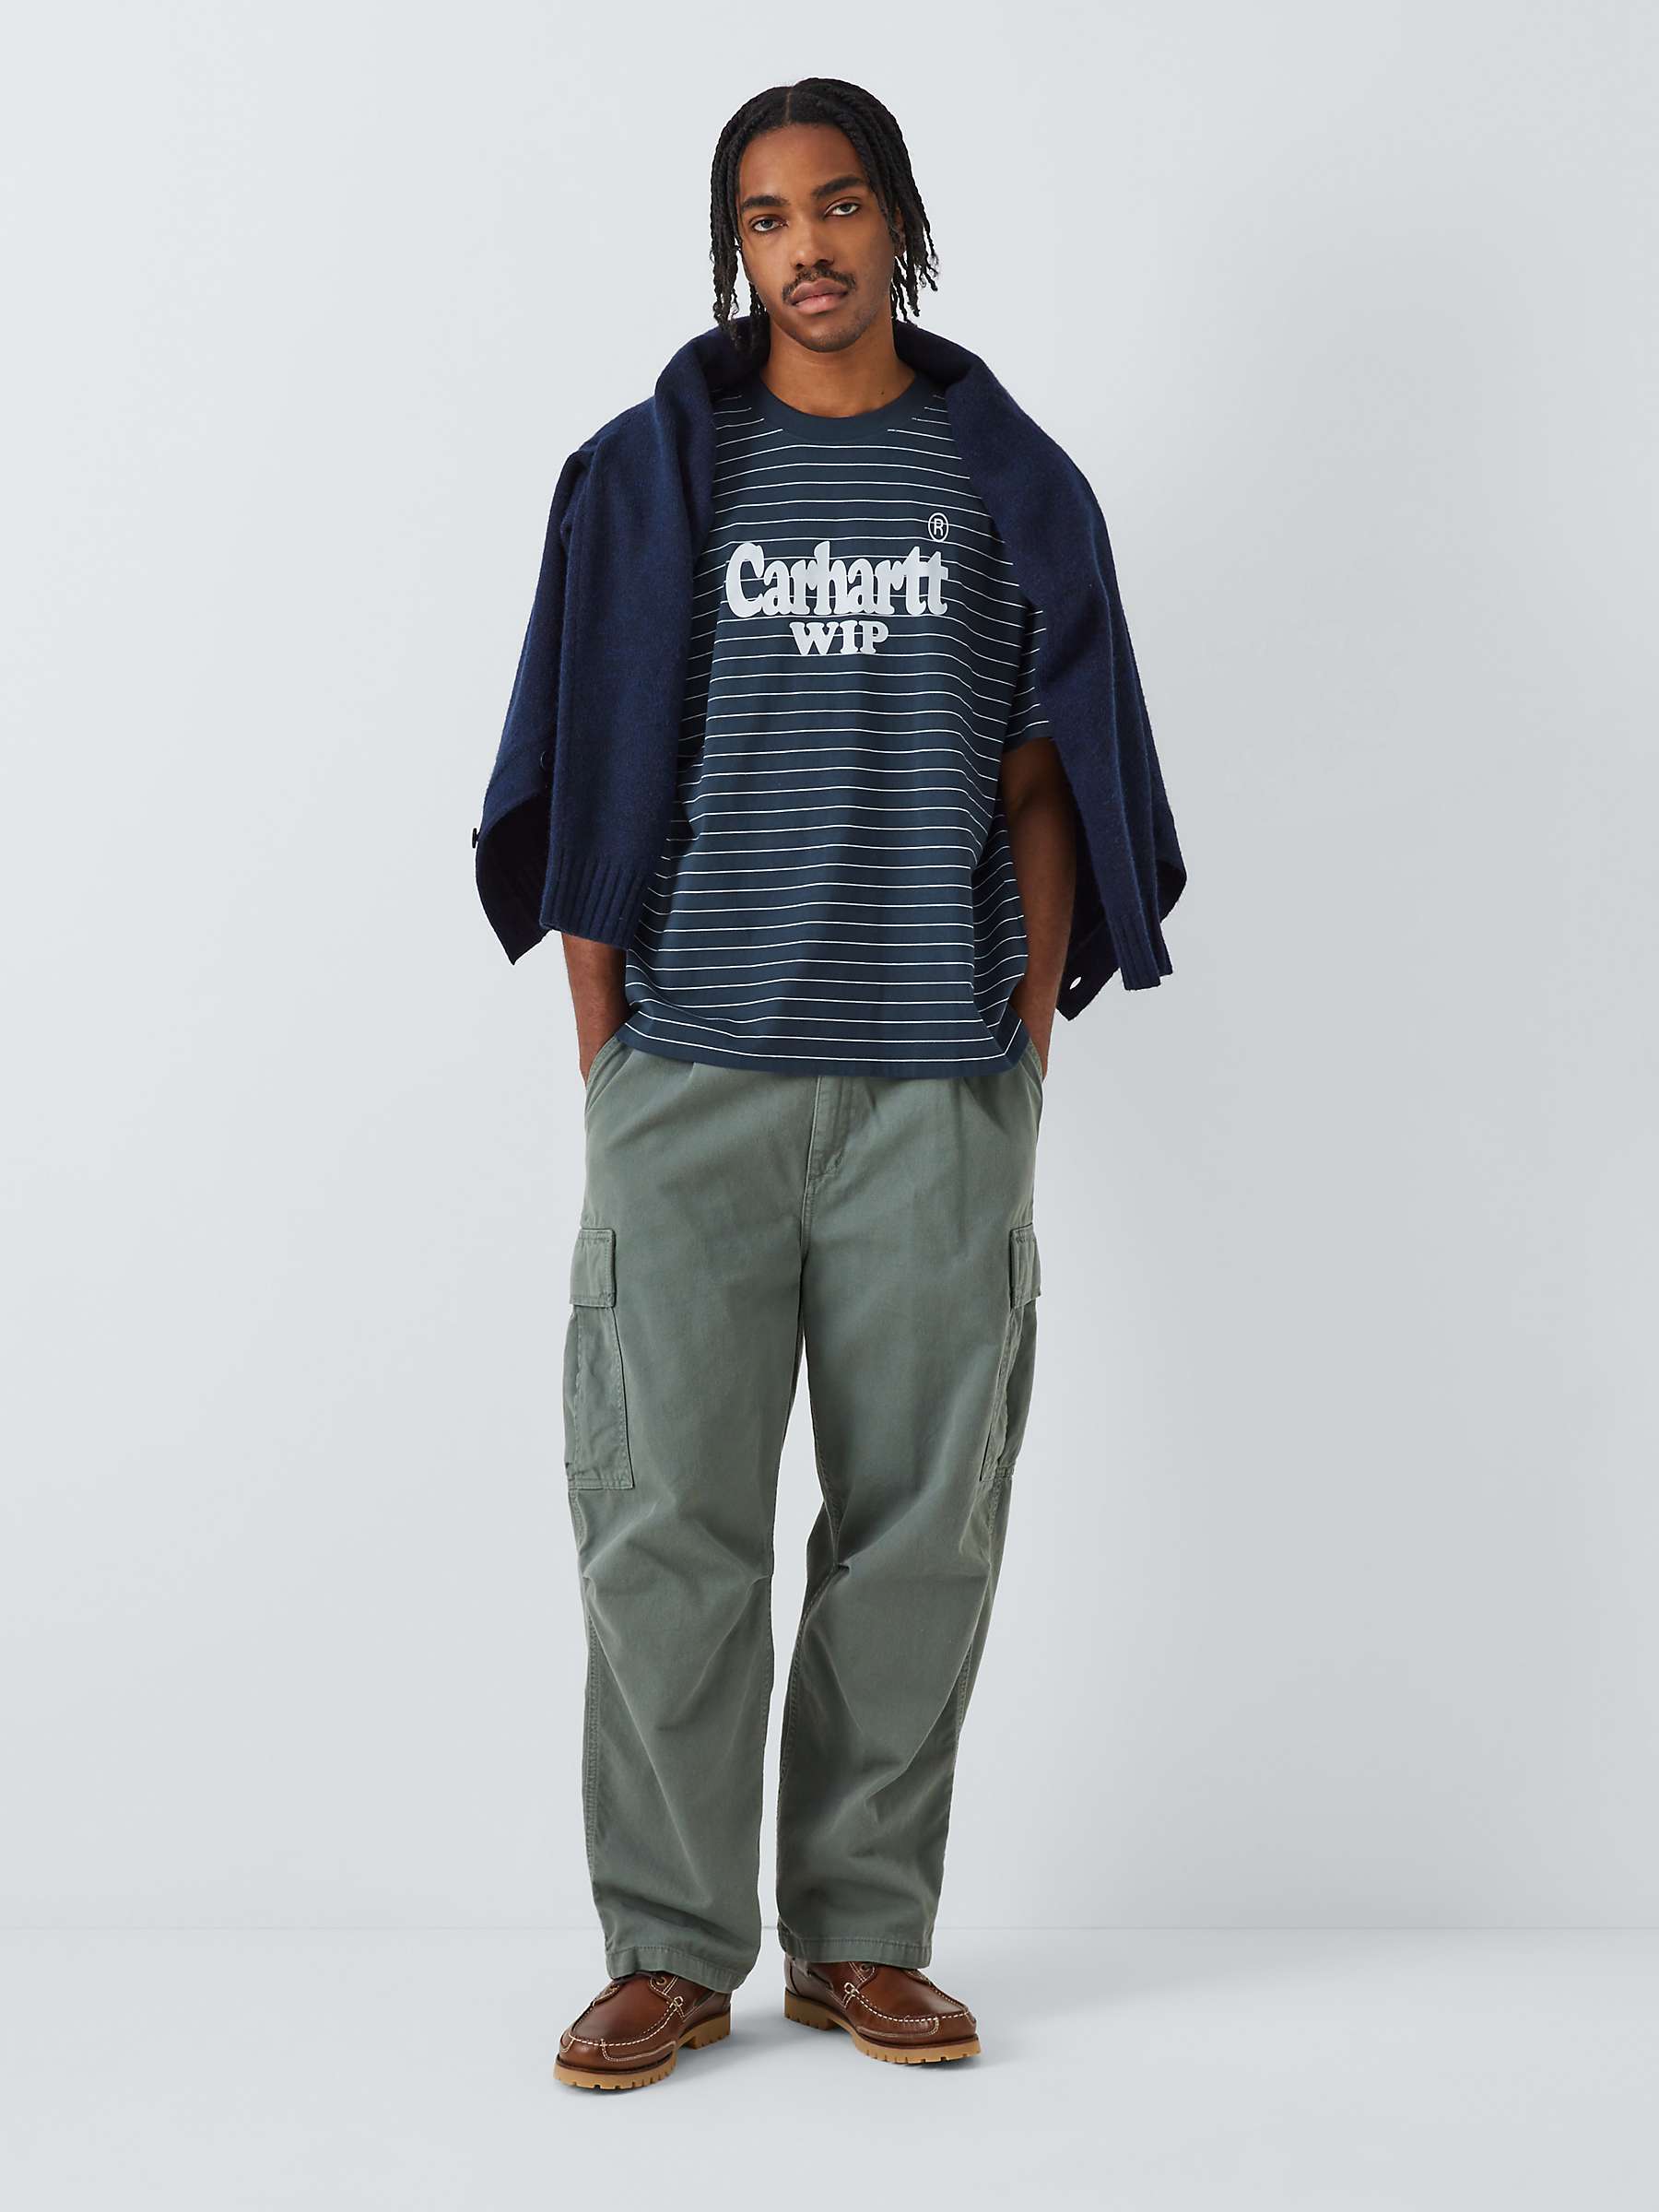 Buy Carhartt WIP Striped Cotton T-Shirt, Blue/White Online at johnlewis.com